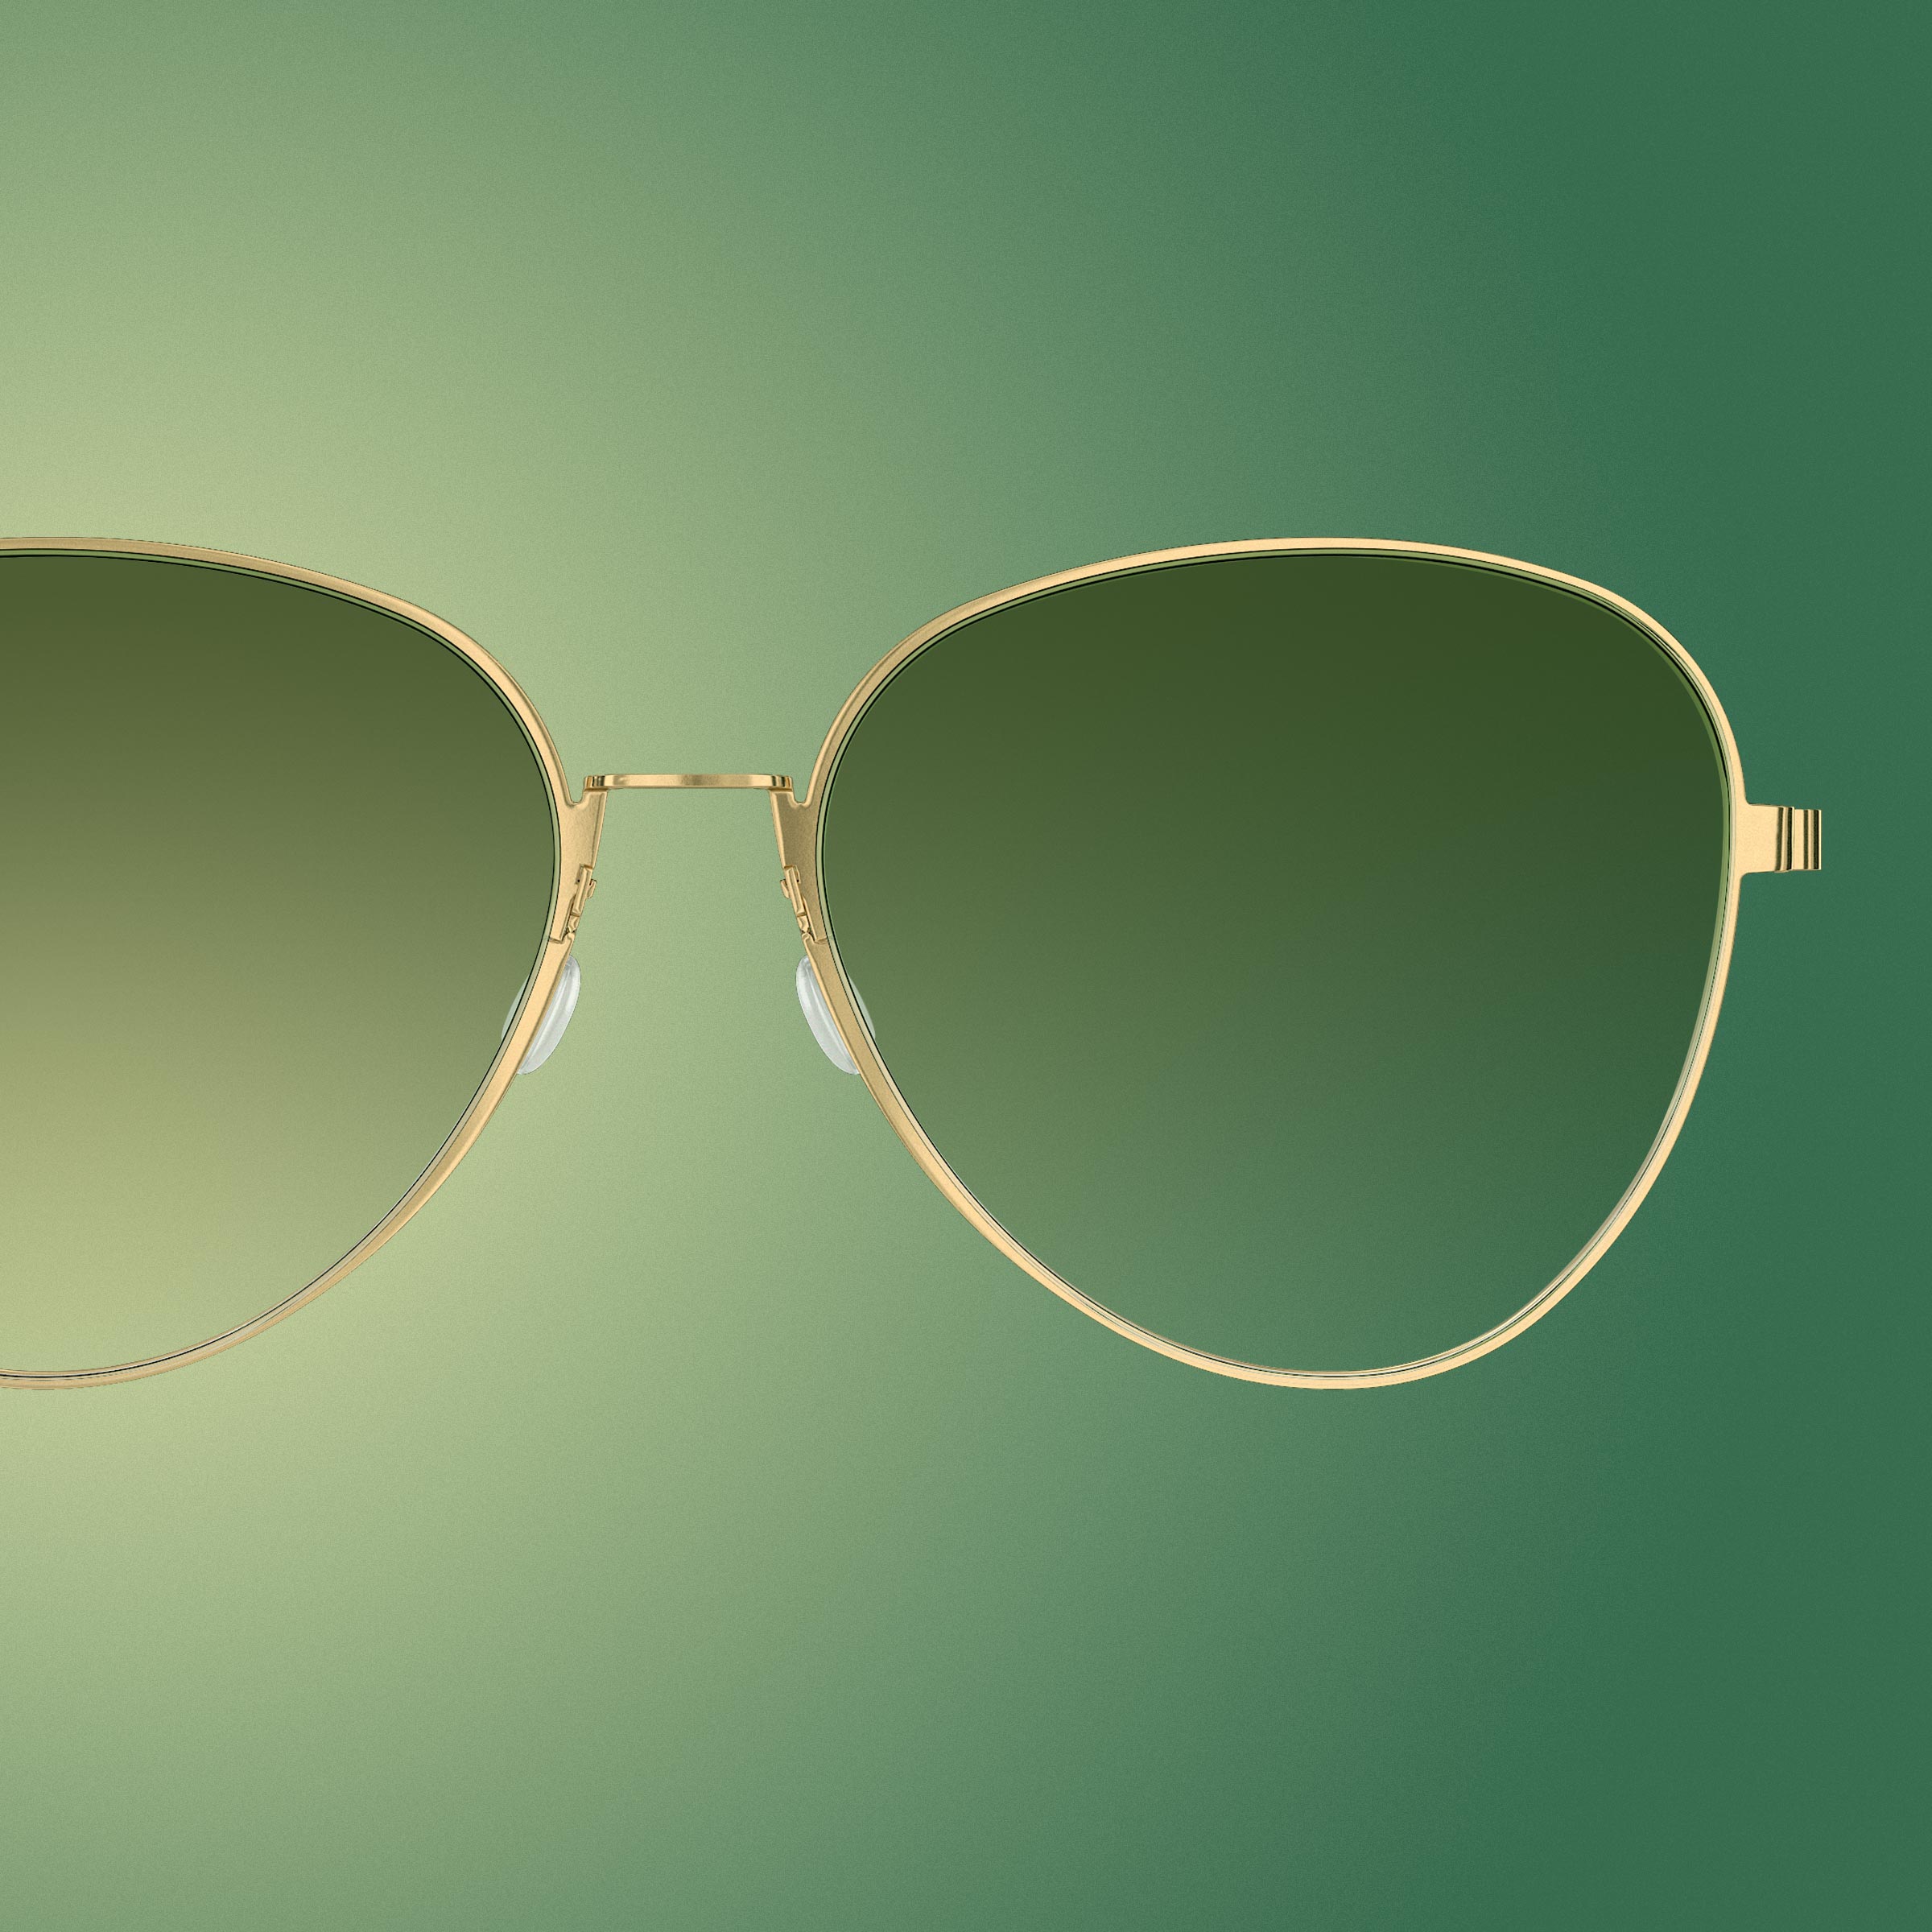 IDEAT magazine featuring LINDBERG aviator shape gold titanium glasses in Model 8908 PGT with green gradient lenses